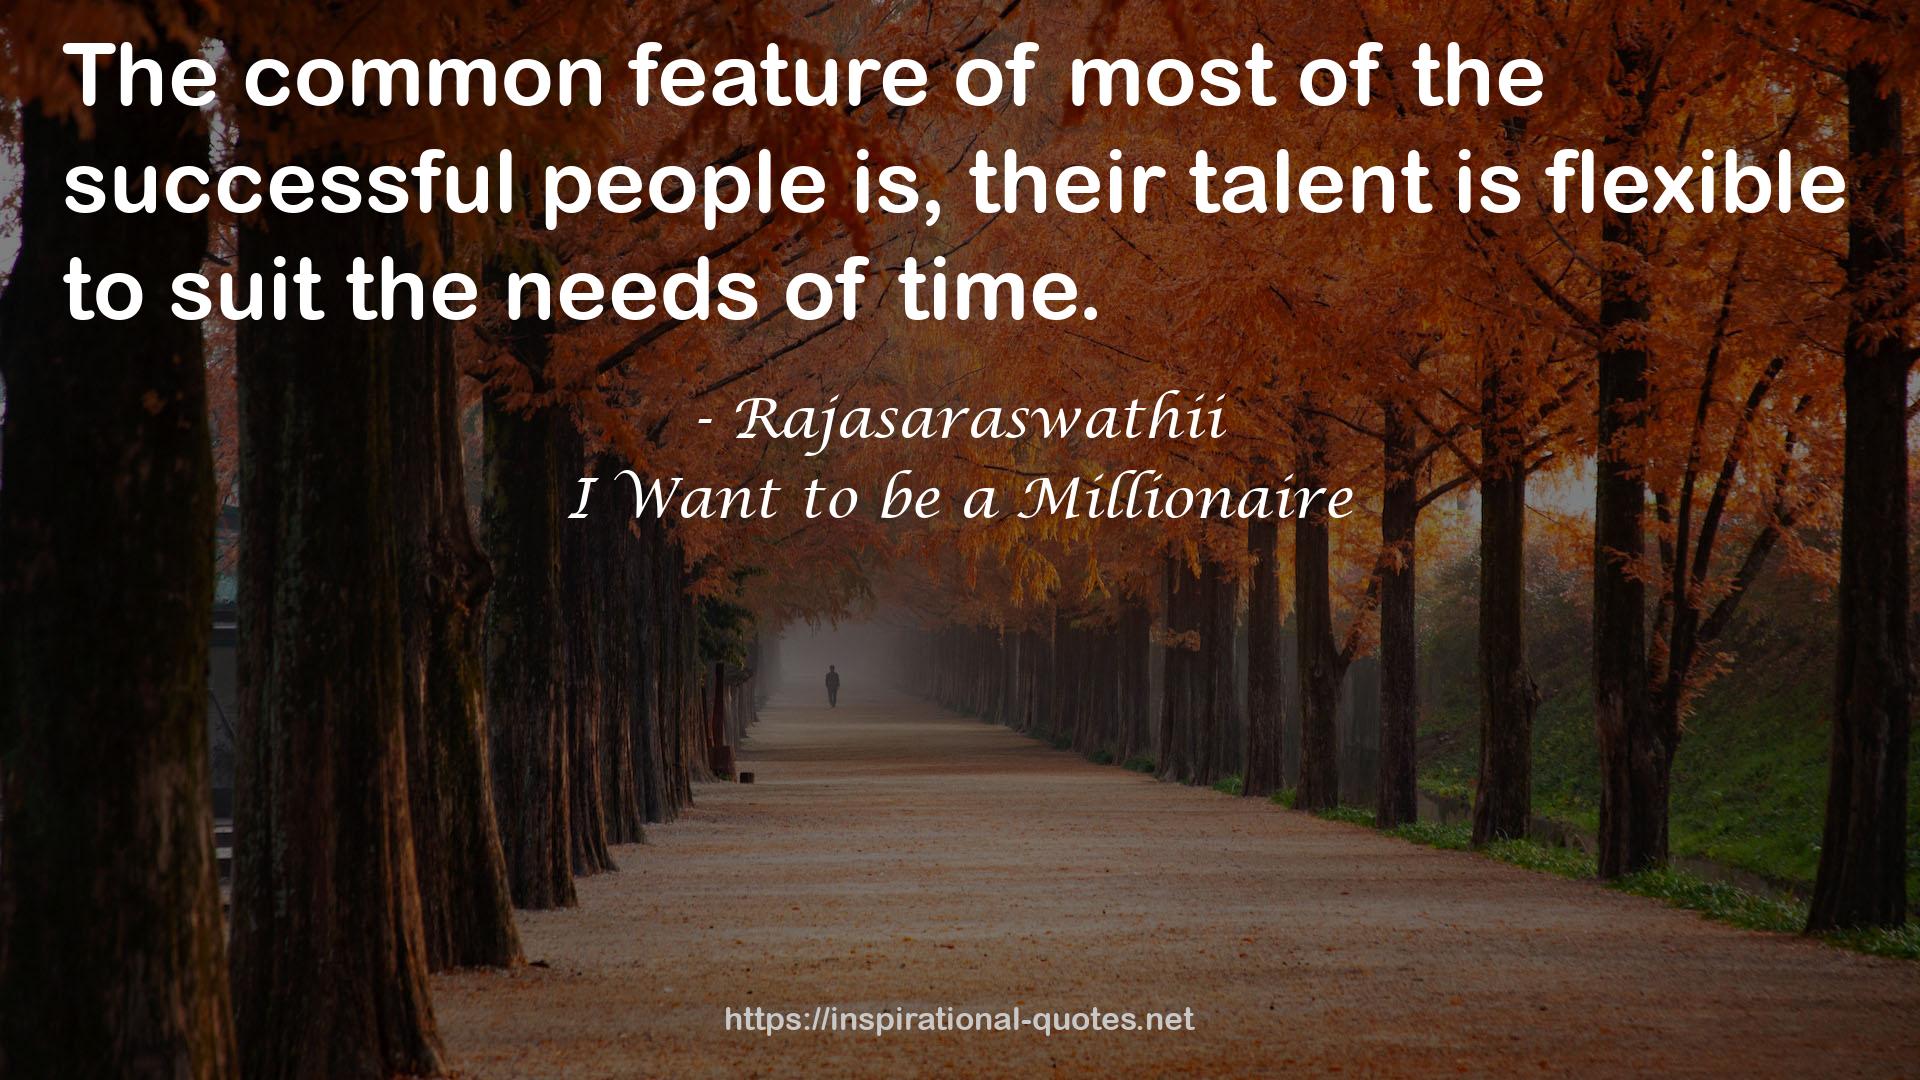 I Want to be a Millionaire QUOTES